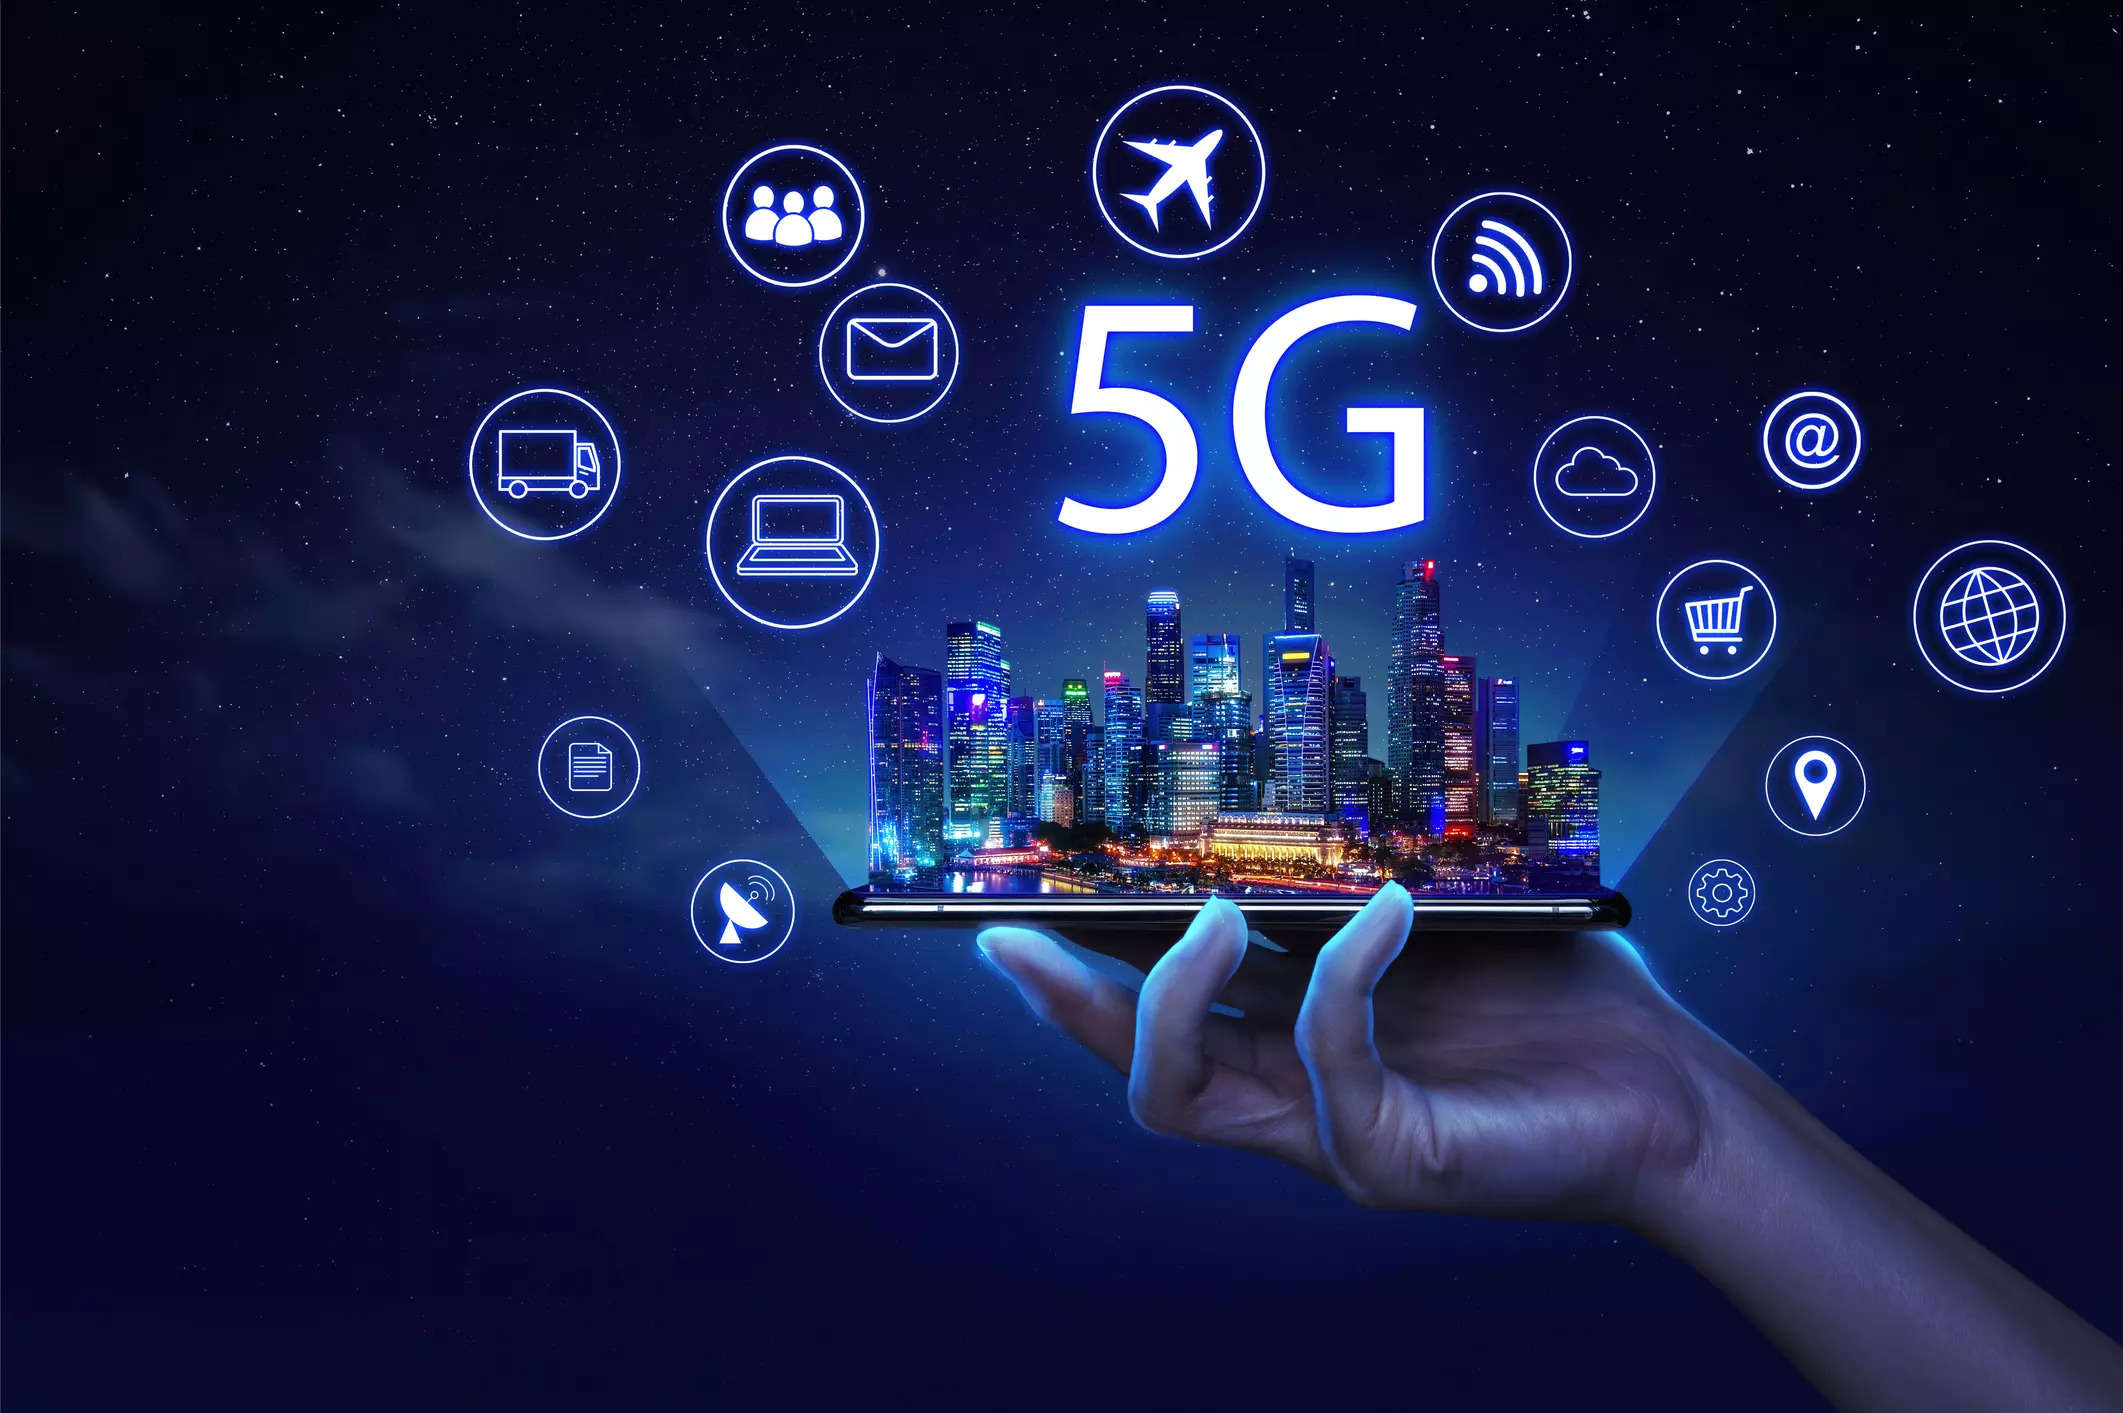 New data bill draft almost ready, says minister; tech firms' 5G wait grows longer